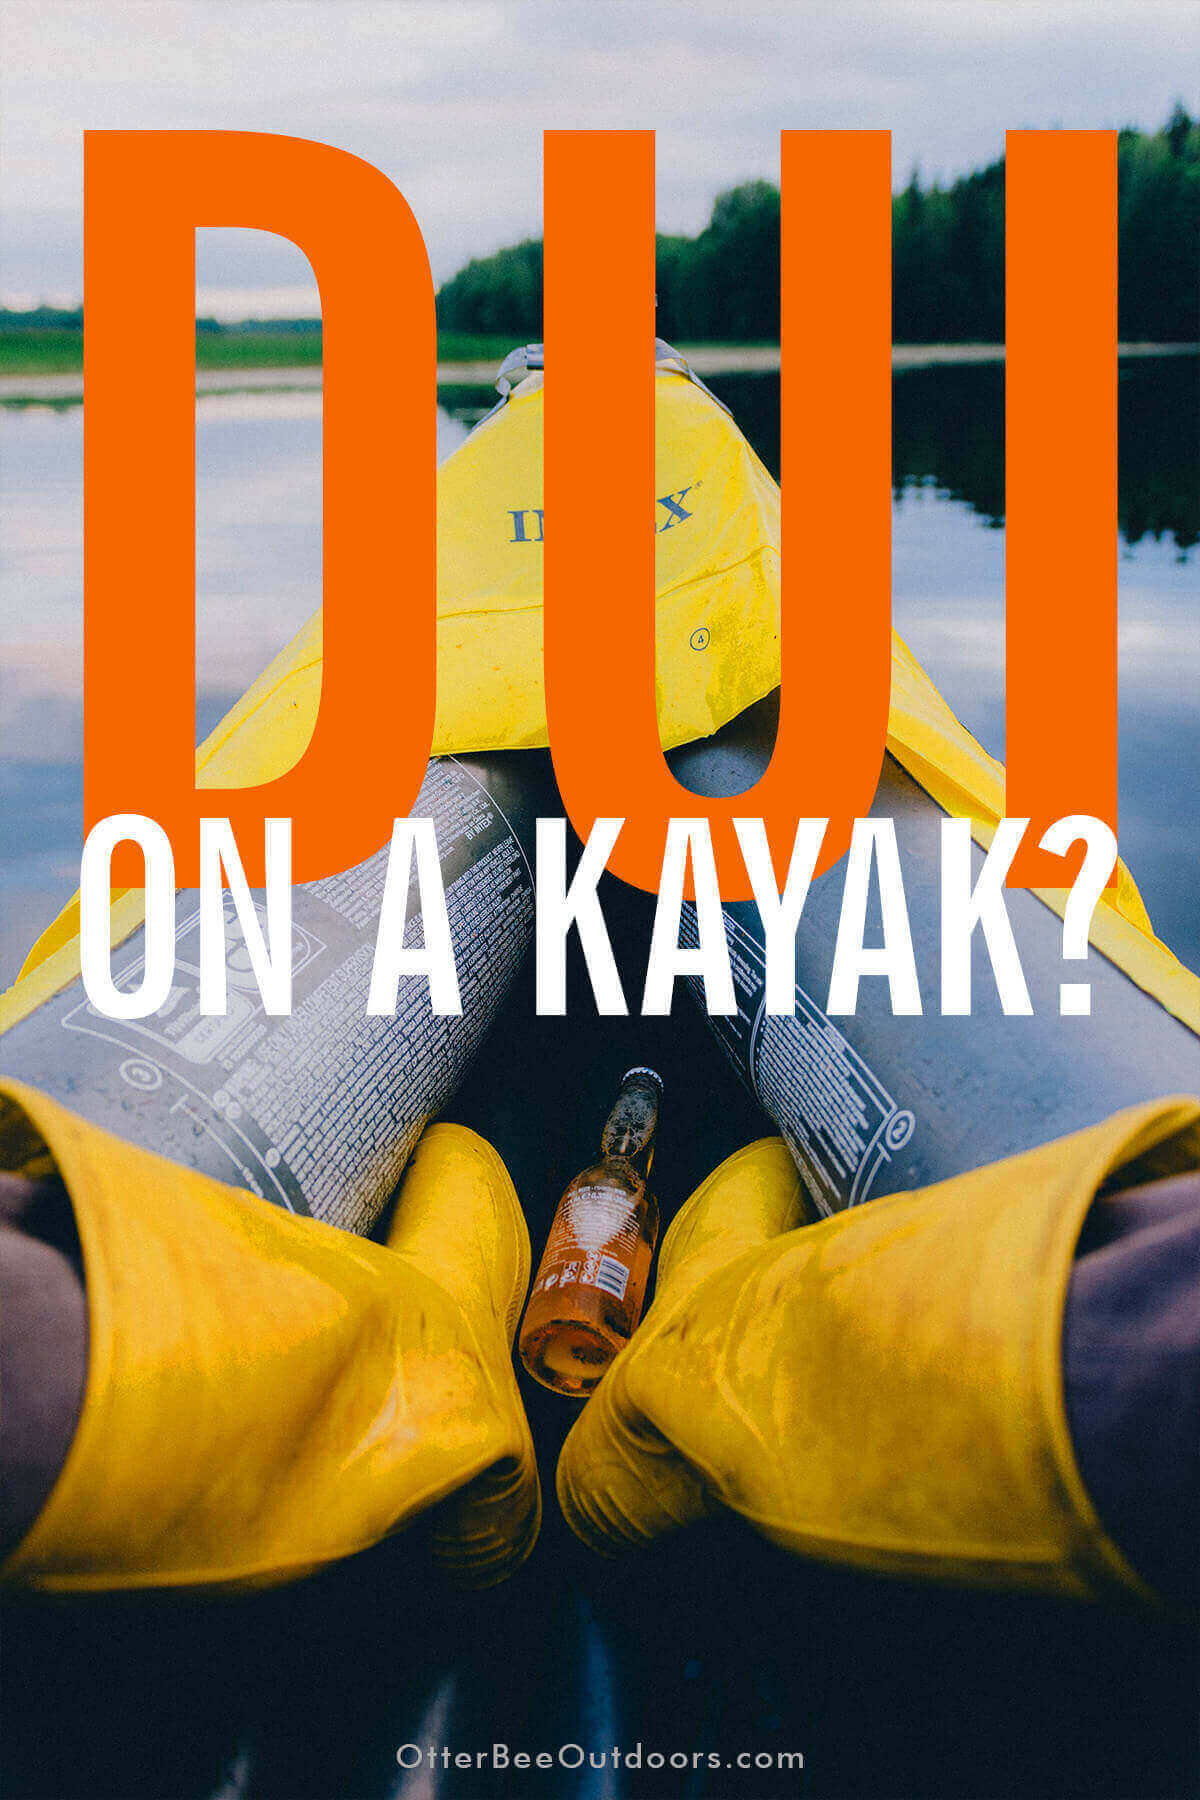 A kayaker drinking beer in an inflatable kayak.